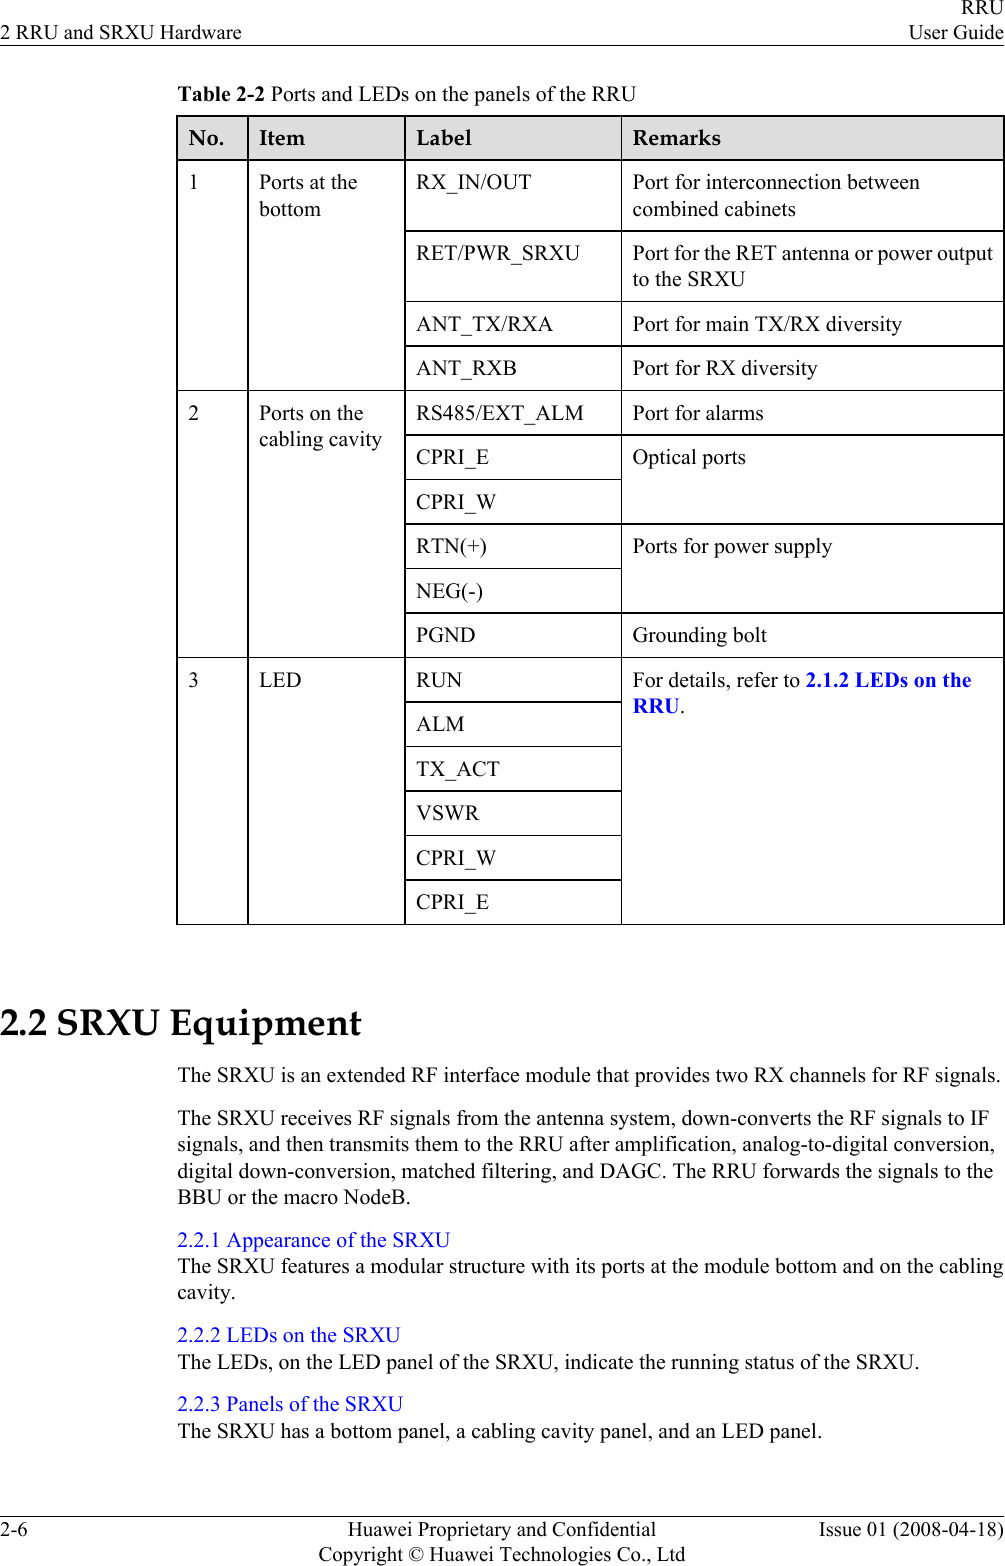 Table 2-2 Ports and LEDs on the panels of the RRUNo. Item Label Remarks1Ports at thebottomRX_IN/OUT Port for interconnection betweencombined cabinetsRET/PWR_SRXU Port for the RET antenna or power outputto the SRXUANT_TX/RXA Port for main TX/RX diversityANT_RXB Port for RX diversity2 Ports on thecabling cavityRS485/EXT_ALM Port for alarmsCPRI_E Optical portsCPRI_WRTN(+) Ports for power supplyNEG(-)PGND Grounding bolt3 LED RUN For details, refer to 2.1.2 LEDs on theRRU.ALMTX_ACTVSWRCPRI_WCPRI_E 2.2 SRXU EquipmentThe SRXU is an extended RF interface module that provides two RX channels for RF signals.The SRXU receives RF signals from the antenna system, down-converts the RF signals to IFsignals, and then transmits them to the RRU after amplification, analog-to-digital conversion,digital down-conversion, matched filtering, and DAGC. The RRU forwards the signals to theBBU or the macro NodeB.2.2.1 Appearance of the SRXUThe SRXU features a modular structure with its ports at the module bottom and on the cablingcavity.2.2.2 LEDs on the SRXUThe LEDs, on the LED panel of the SRXU, indicate the running status of the SRXU.2.2.3 Panels of the SRXUThe SRXU has a bottom panel, a cabling cavity panel, and an LED panel.2 RRU and SRXU HardwareRRUUser Guide2-6 Huawei Proprietary and ConfidentialCopyright © Huawei Technologies Co., LtdIssue 01 (2008-04-18)